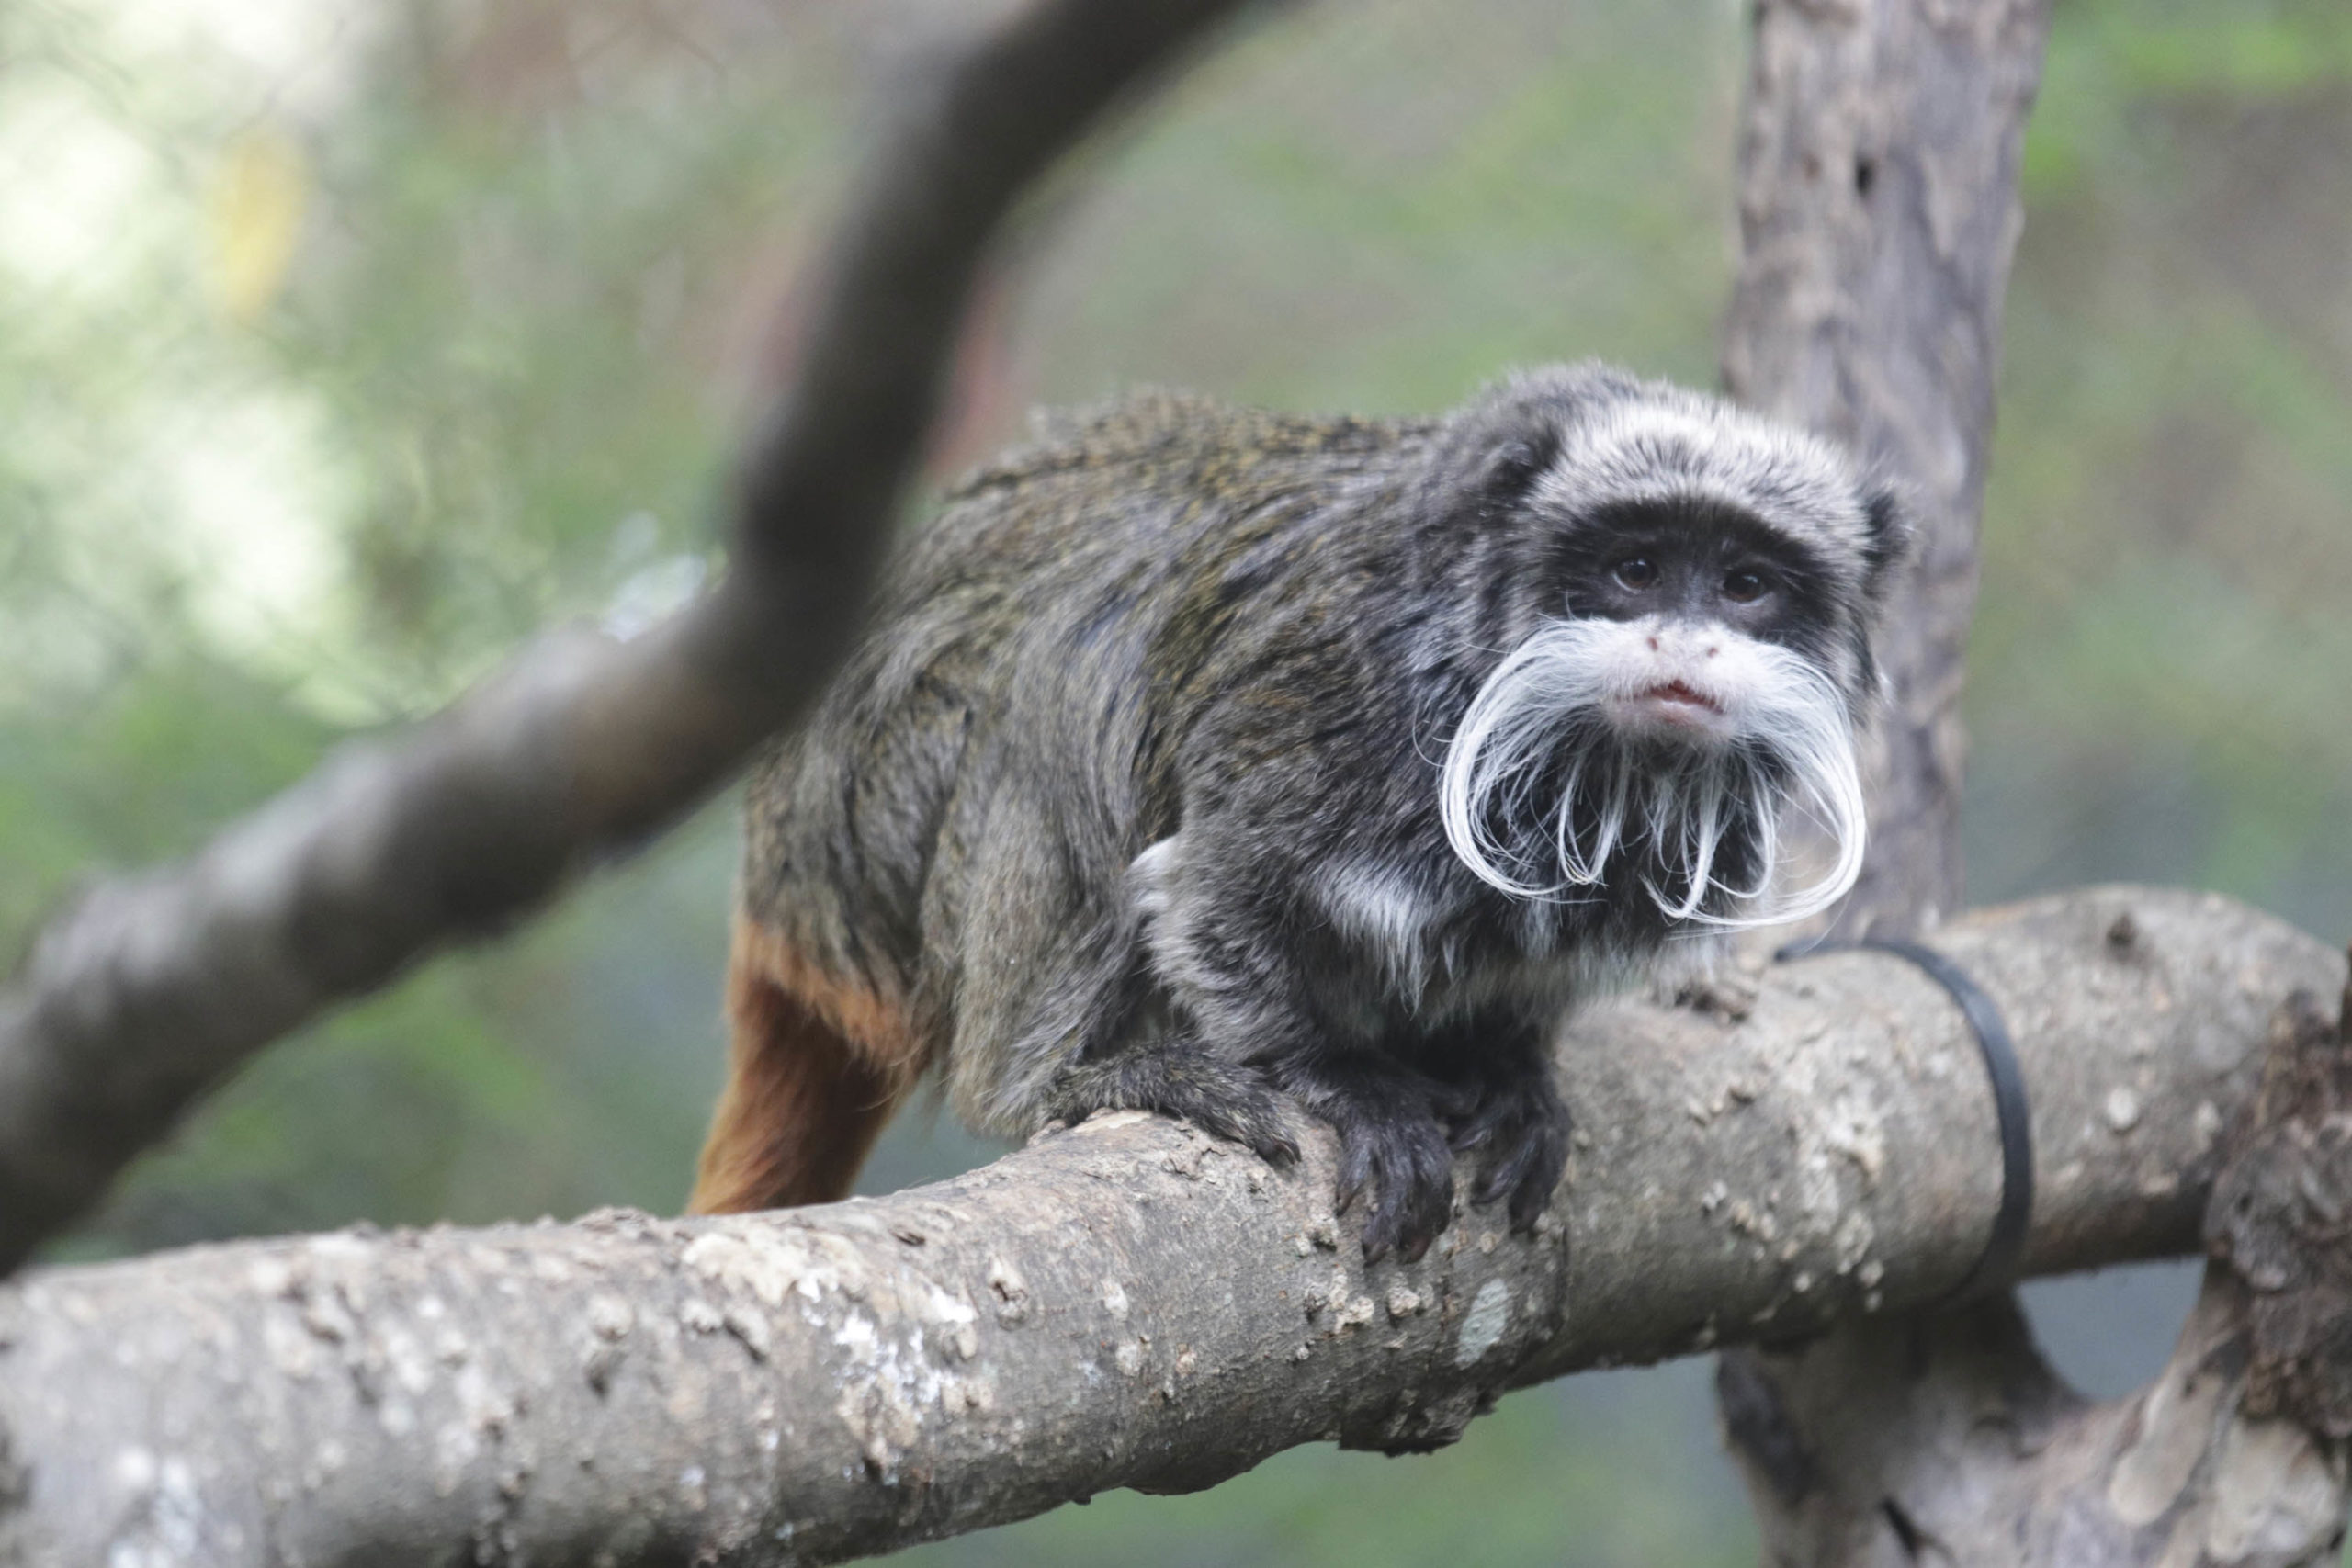 This photo provided by the Dallas Zoo shows an emperor tamarins that lives at the zoo. Two monkeys ...